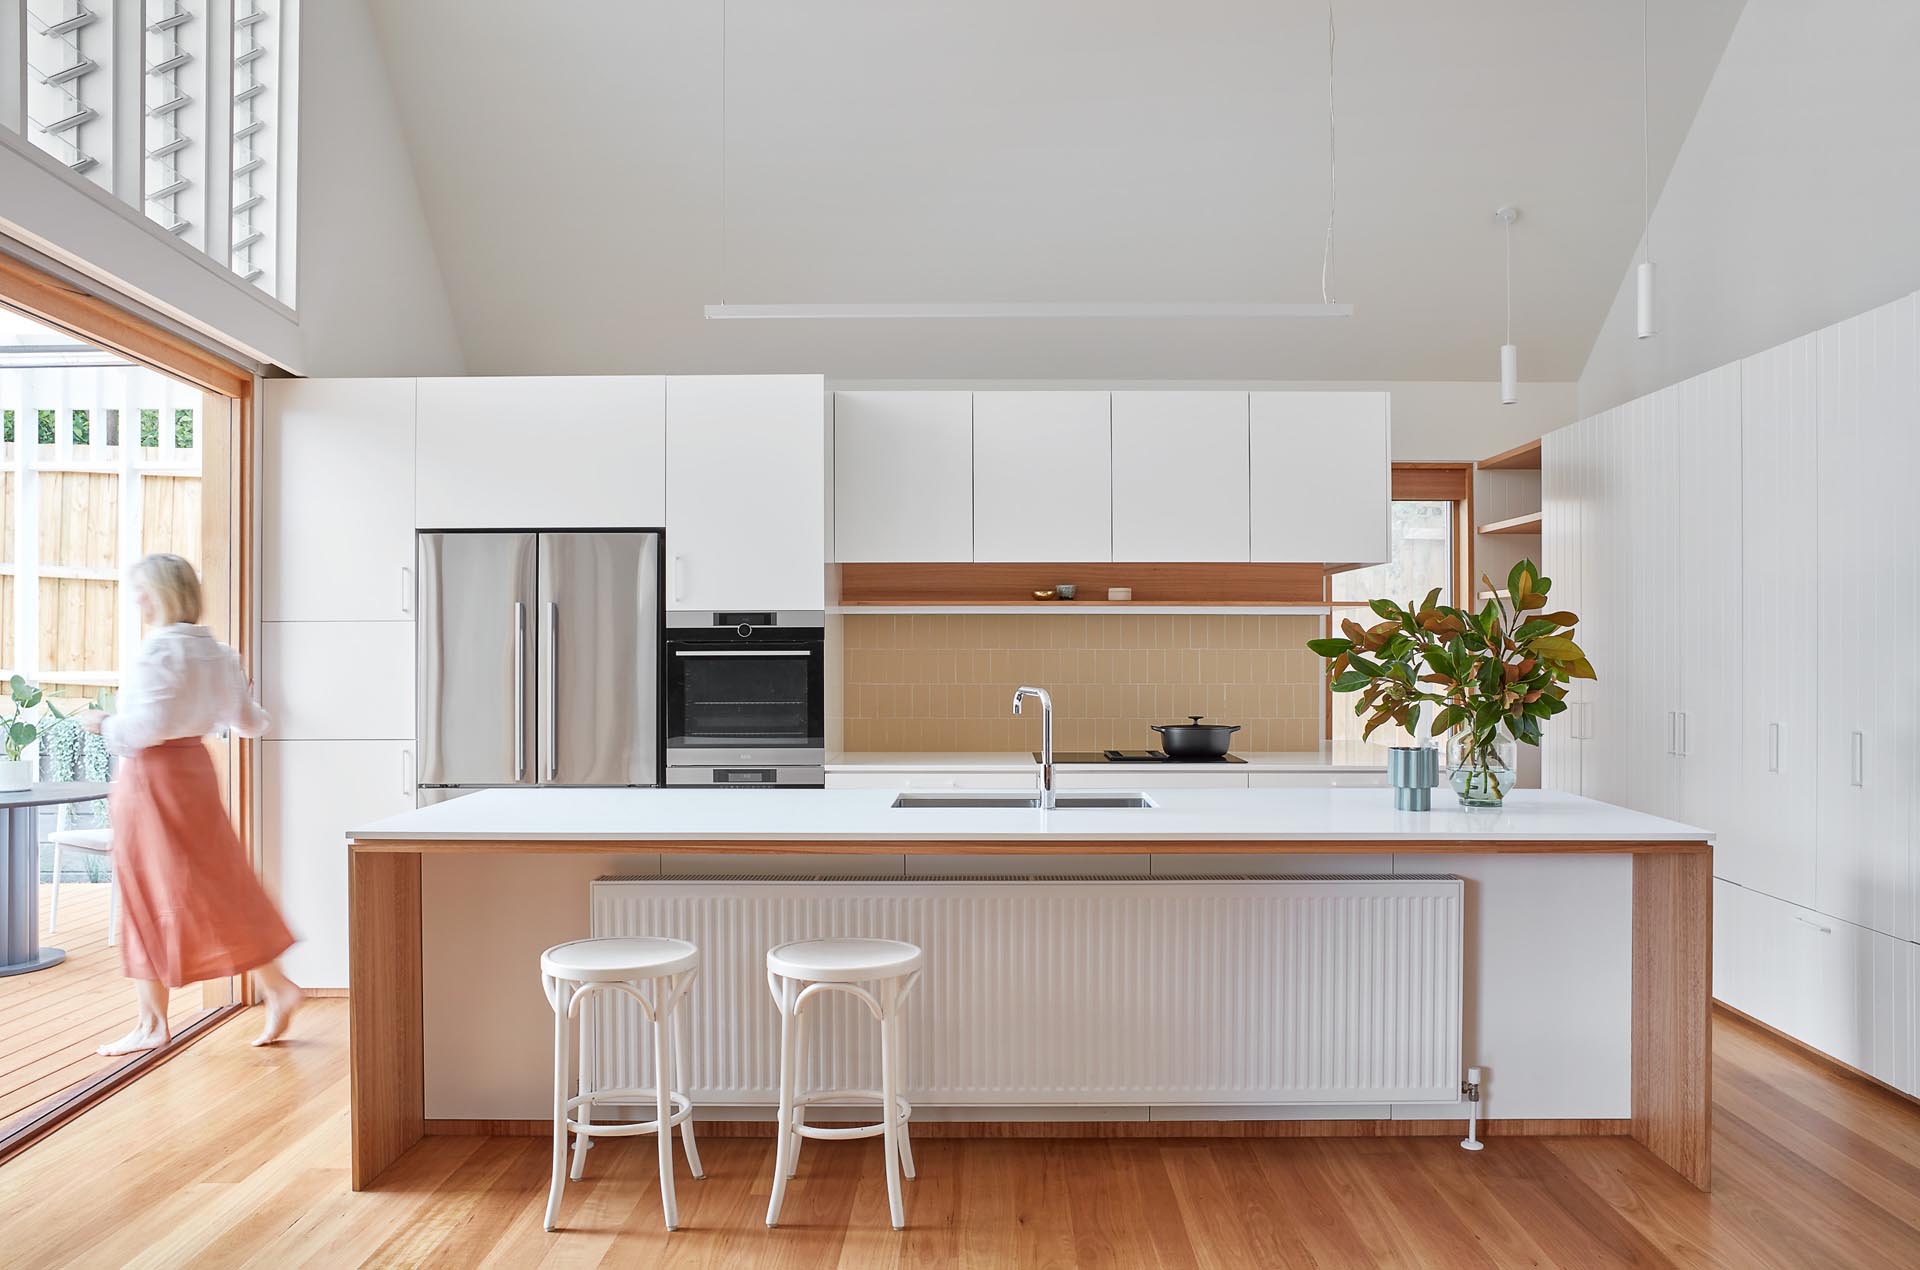 In this modern kitchen, minimalist white cabinets are complemented by the Glacier White Corian countertops and Blackbutt Timber accents.